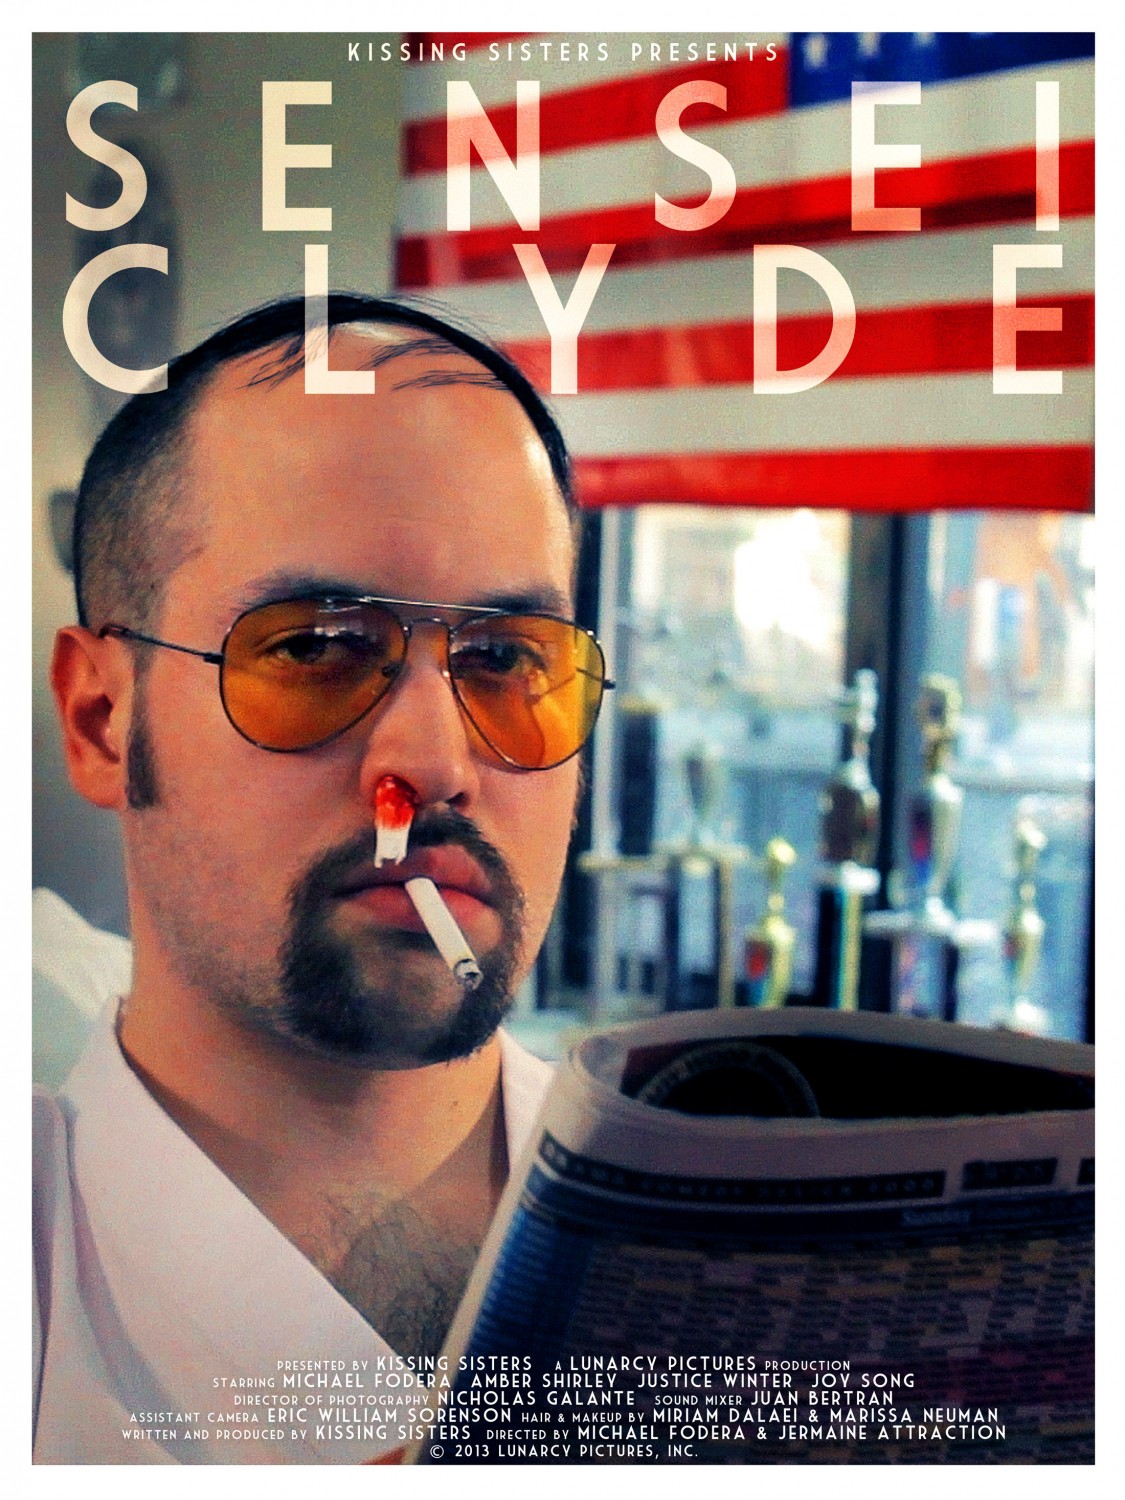 Extra Large Movie Poster Image for Sensei Clyde